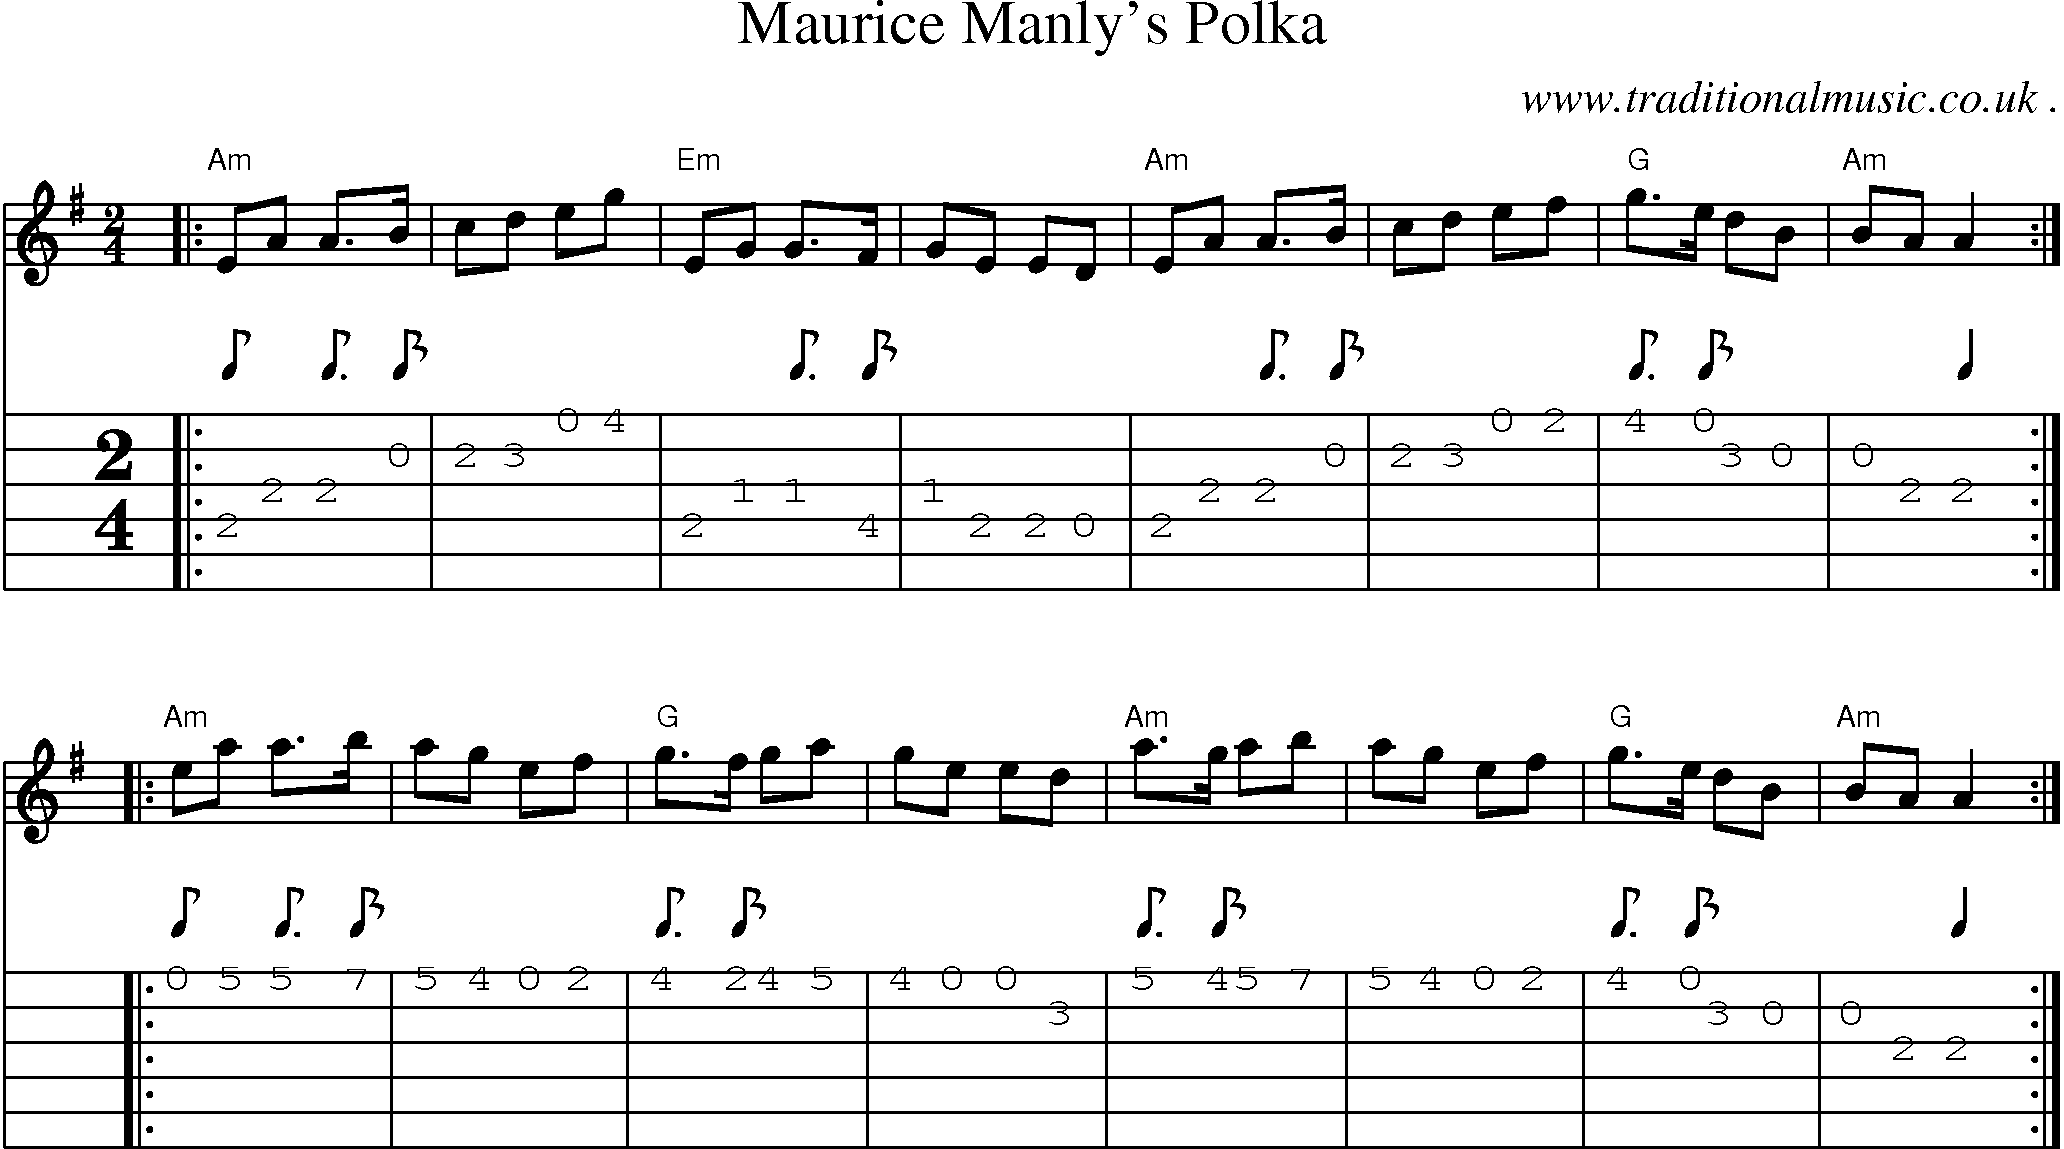 Sheet-music  score, Chords and Guitar Tabs for Maurice Manlys Polka